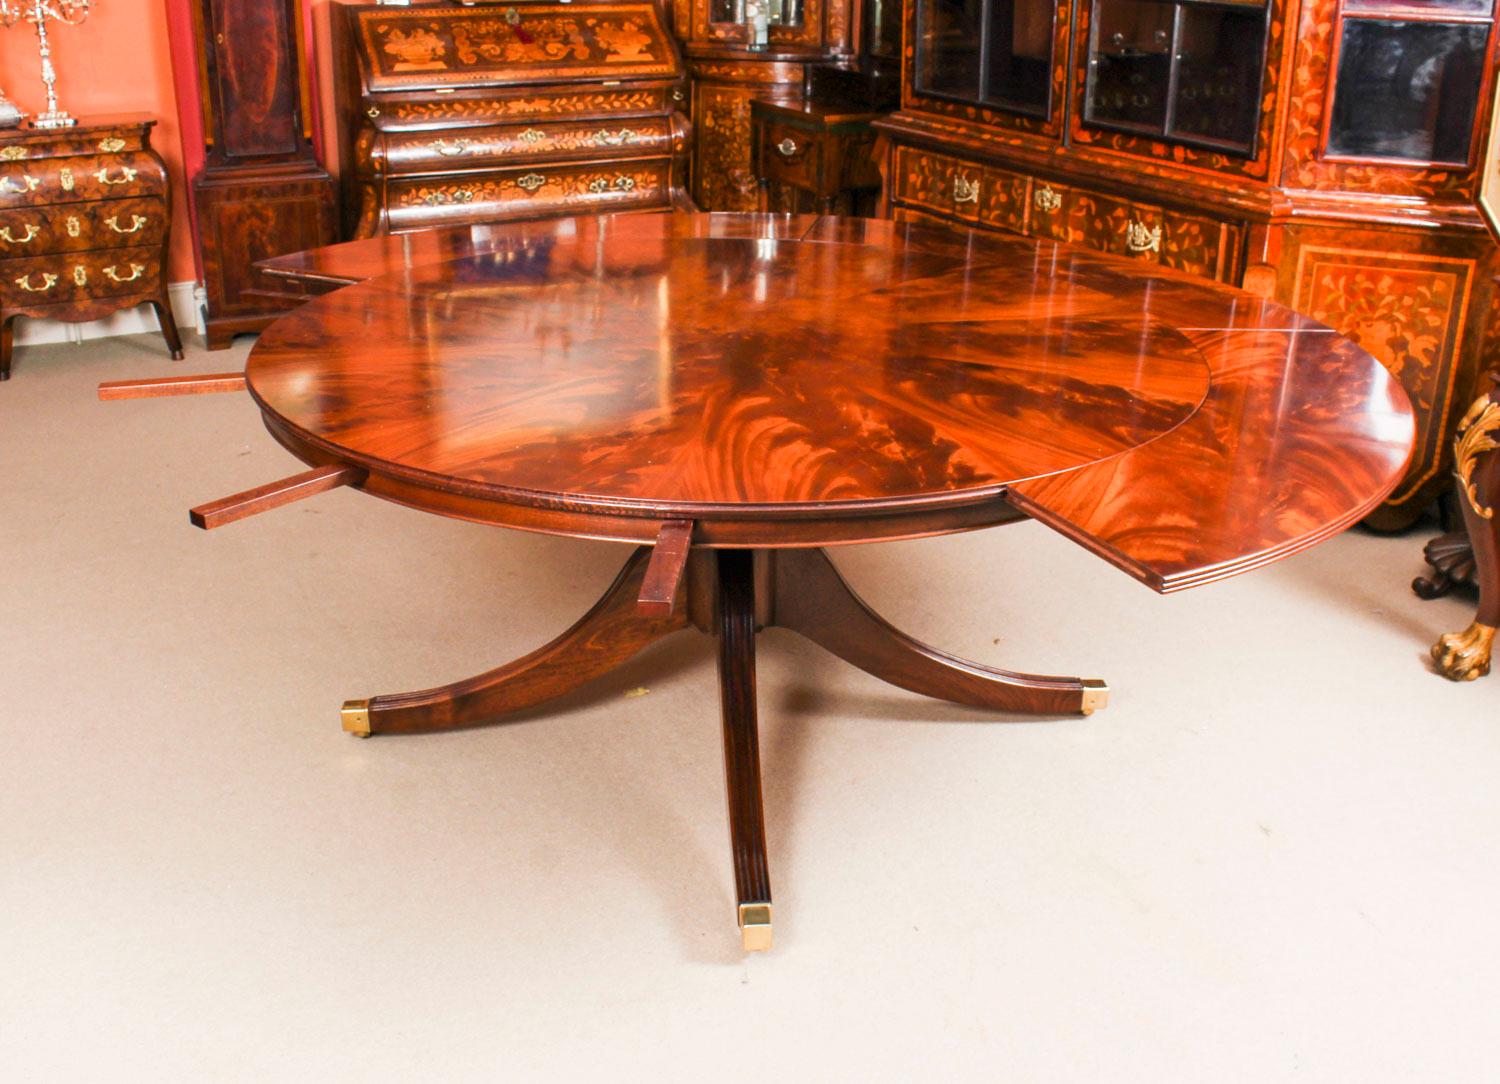 Vintage Flame Mahogany Jupe Dining Table and 10 Chairs, Mid-20th Century 2